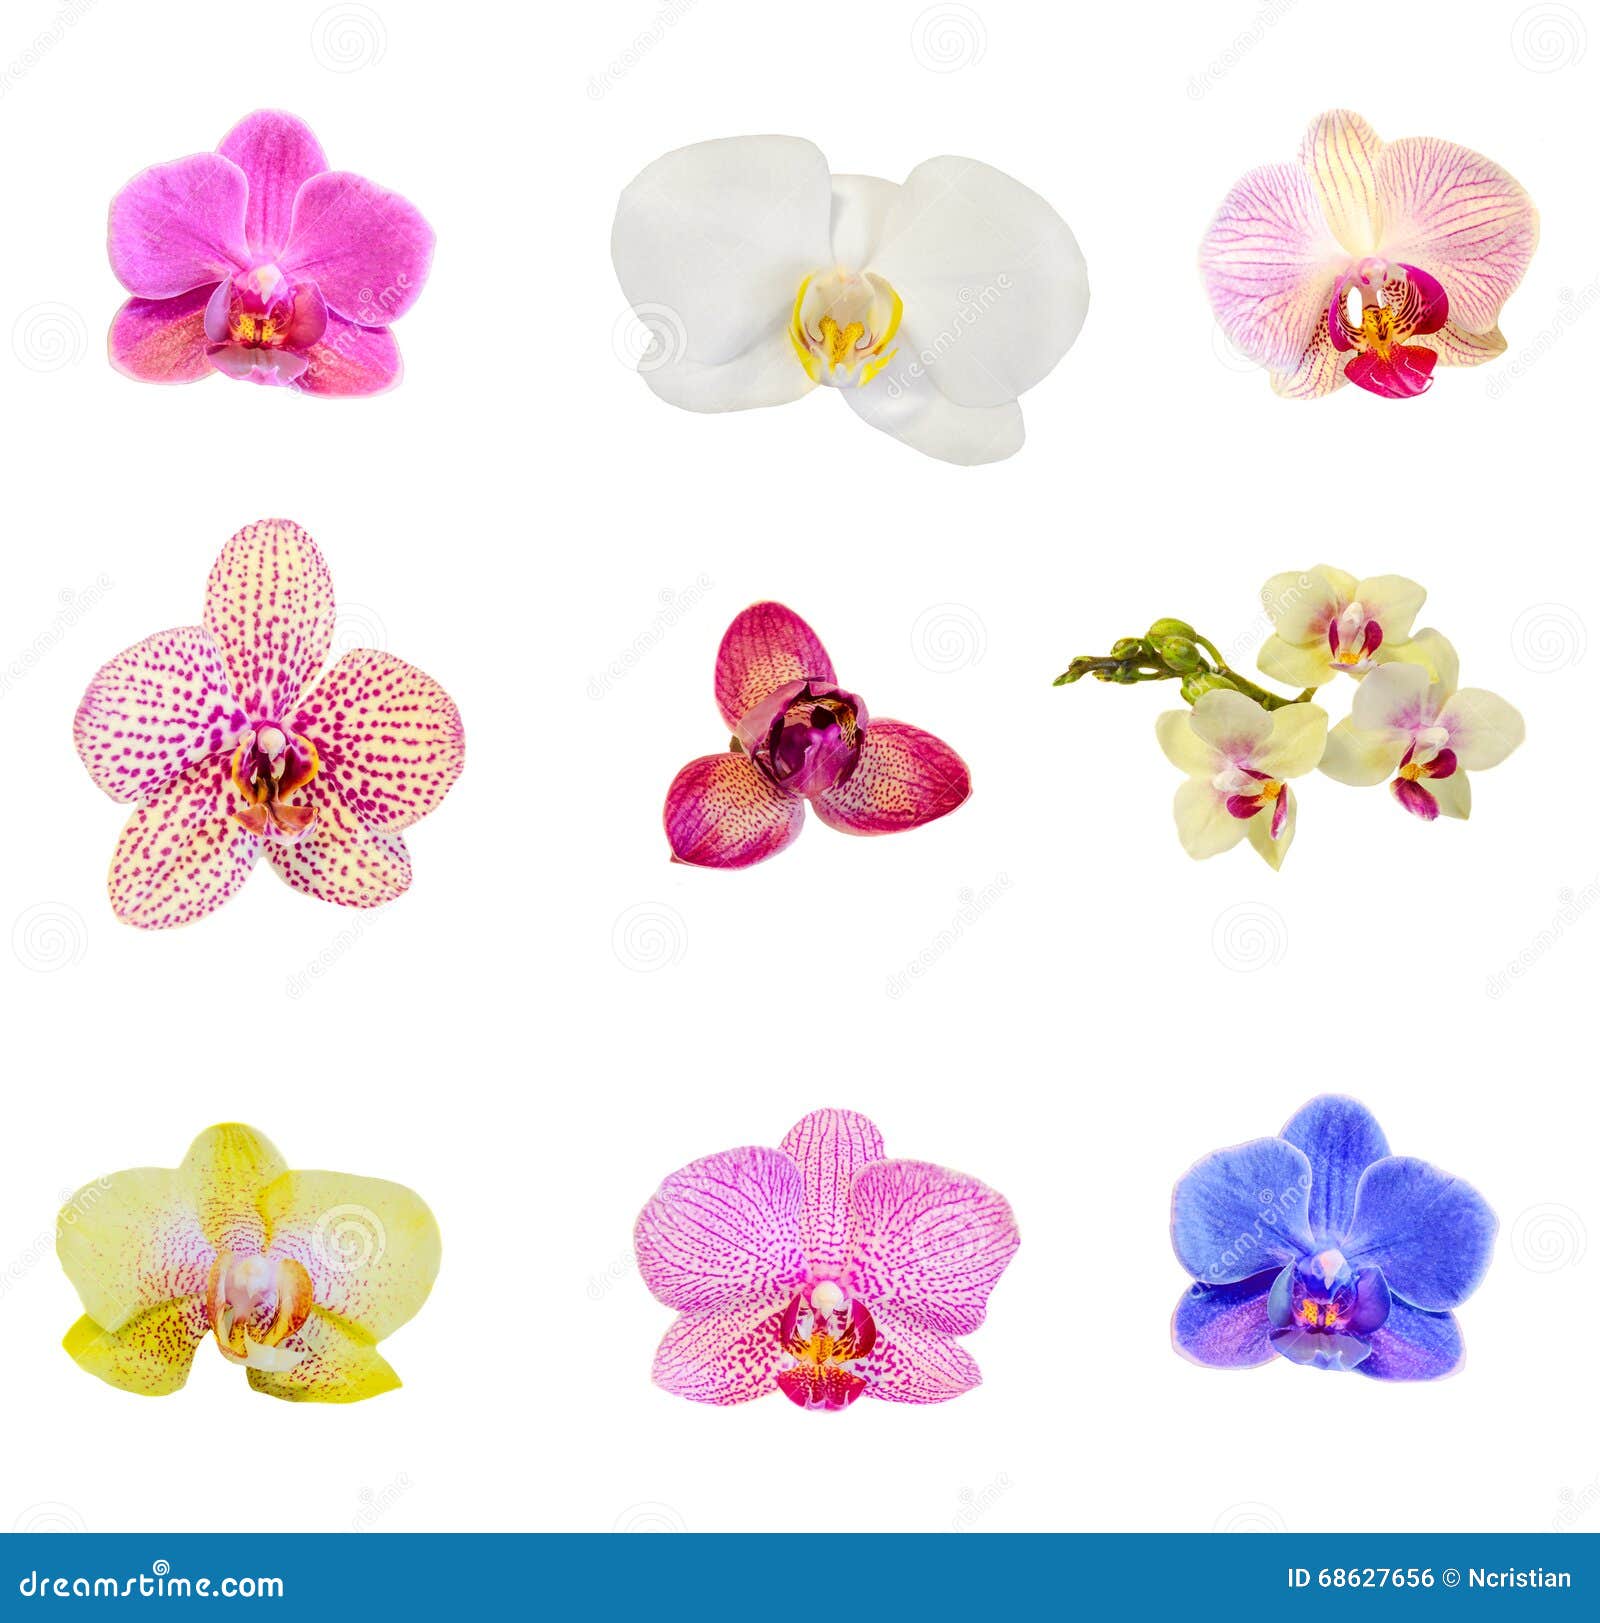 many types, collection of orchids flowers stock photo - image of